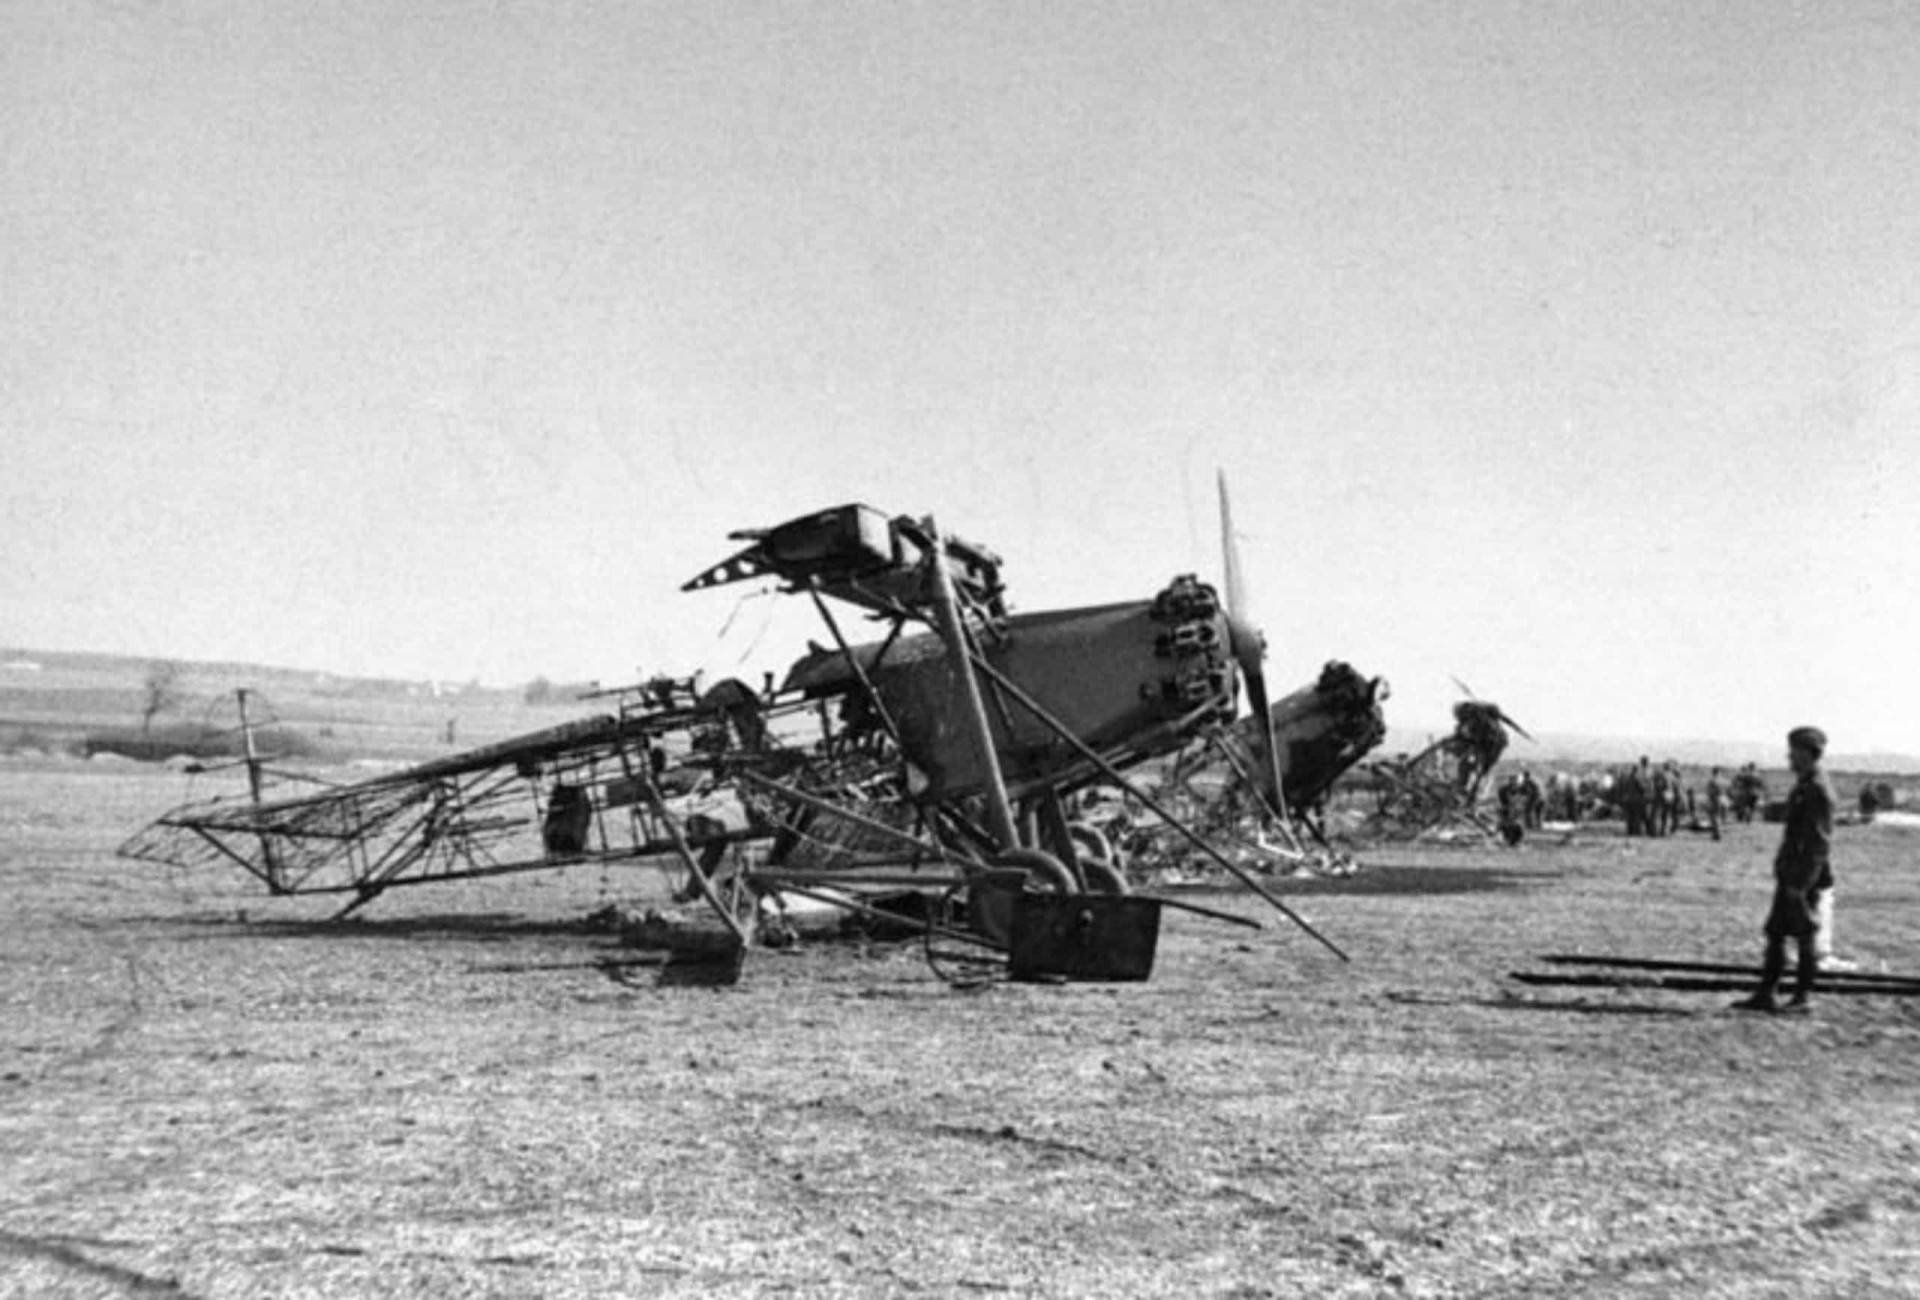 <p>The Danish Army Air Service was mostly destroyed by the German Luftwaffe in a single attack. Pictured is the airfield at Værløse after the assault.</p><p><a href="https://www.msn.com/en-my/community/channel/vid-7xx8mnucu55yw63we9va2gwr7uihbxwc68fxqp25x6tg4ftibpra?cvid=94631541bc0f4f89bfd59158d696ad7e">Follow us and access great exclusive content every day</a></p>